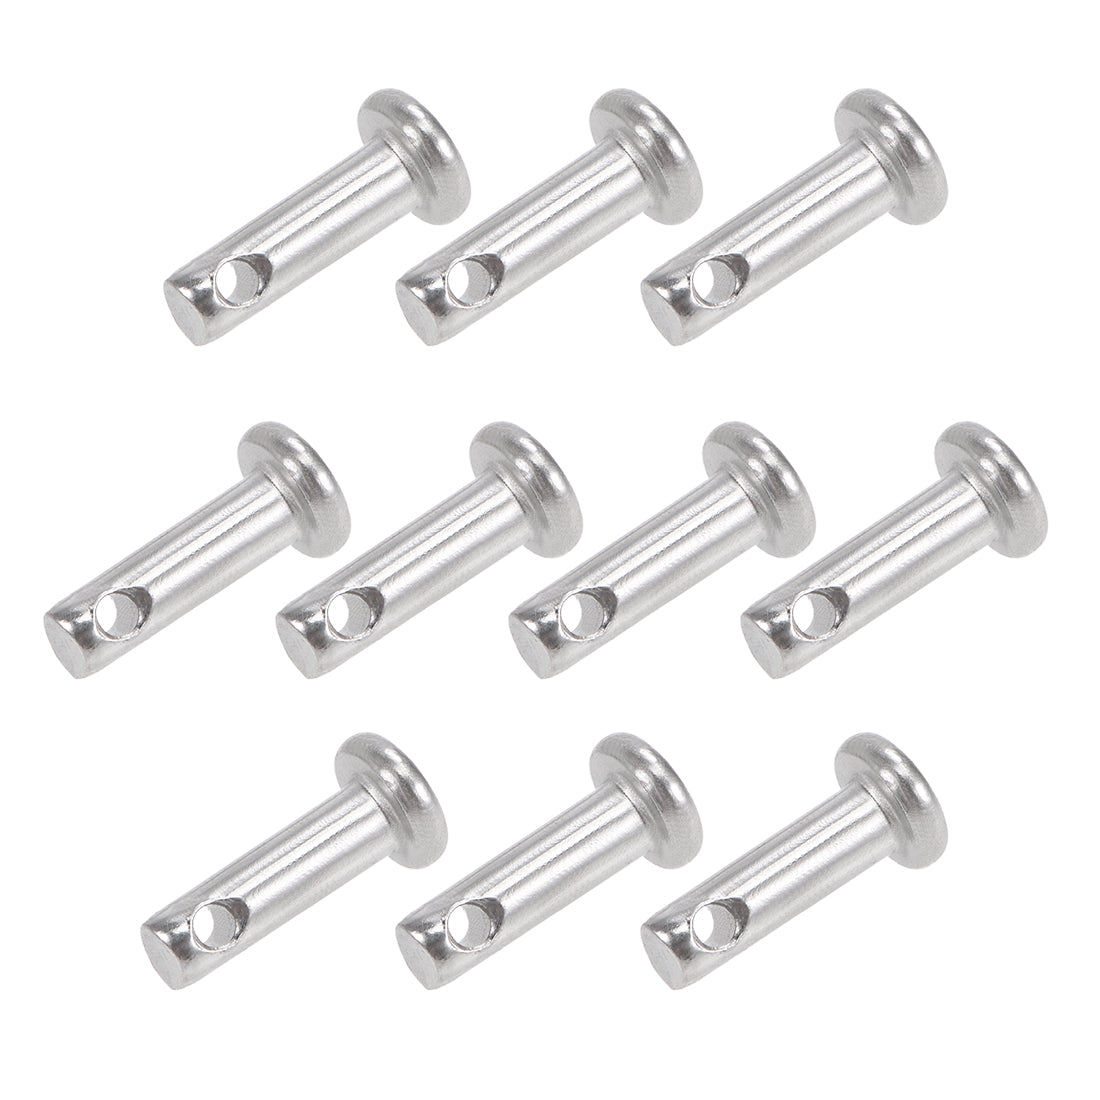 uxcell Uxcell Single Hole Clevis Pins - 3mm x 10mm Flat Head 304 Stainless Steel Link Hinge Pin 10Pcs